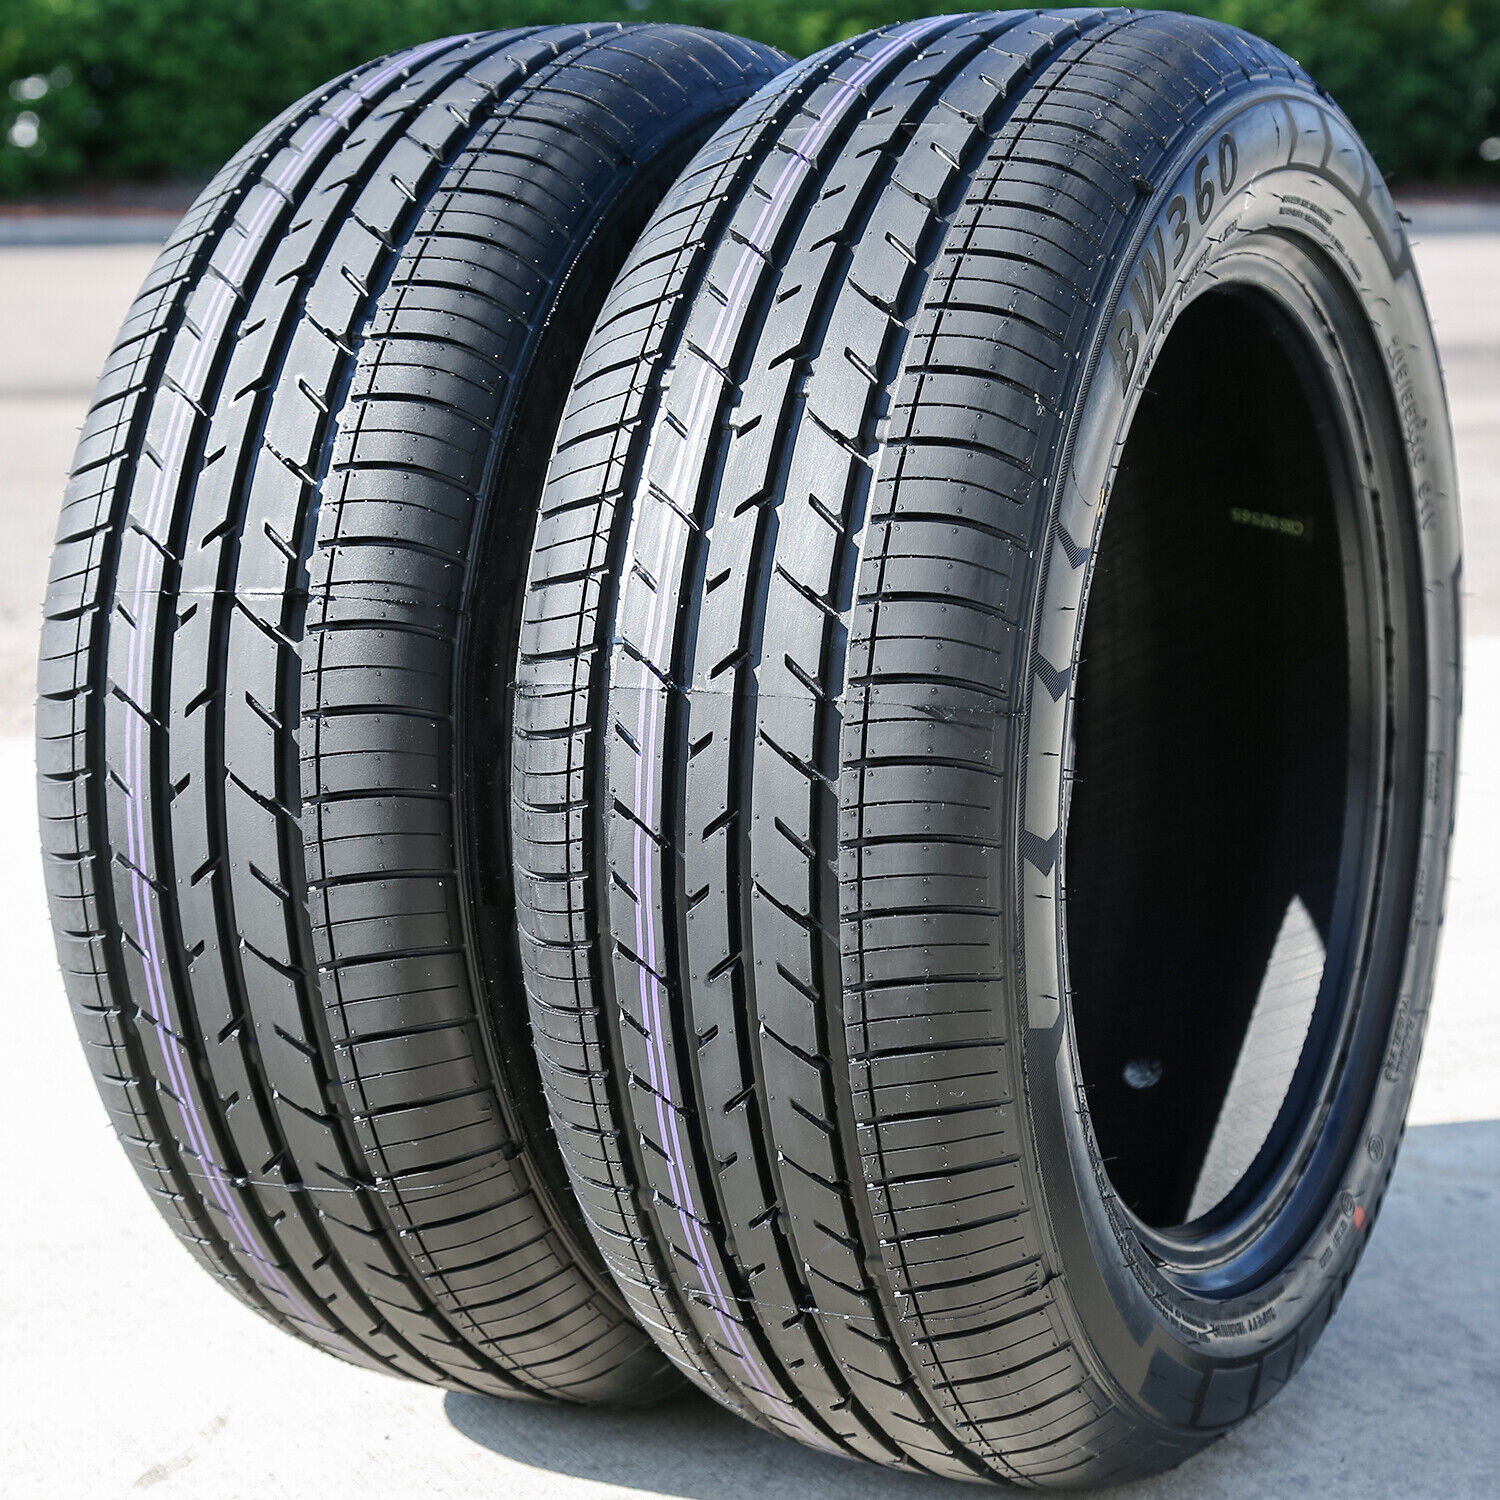 2 Tires Bearway BW360 205/55R16 91V AS A/S Performance